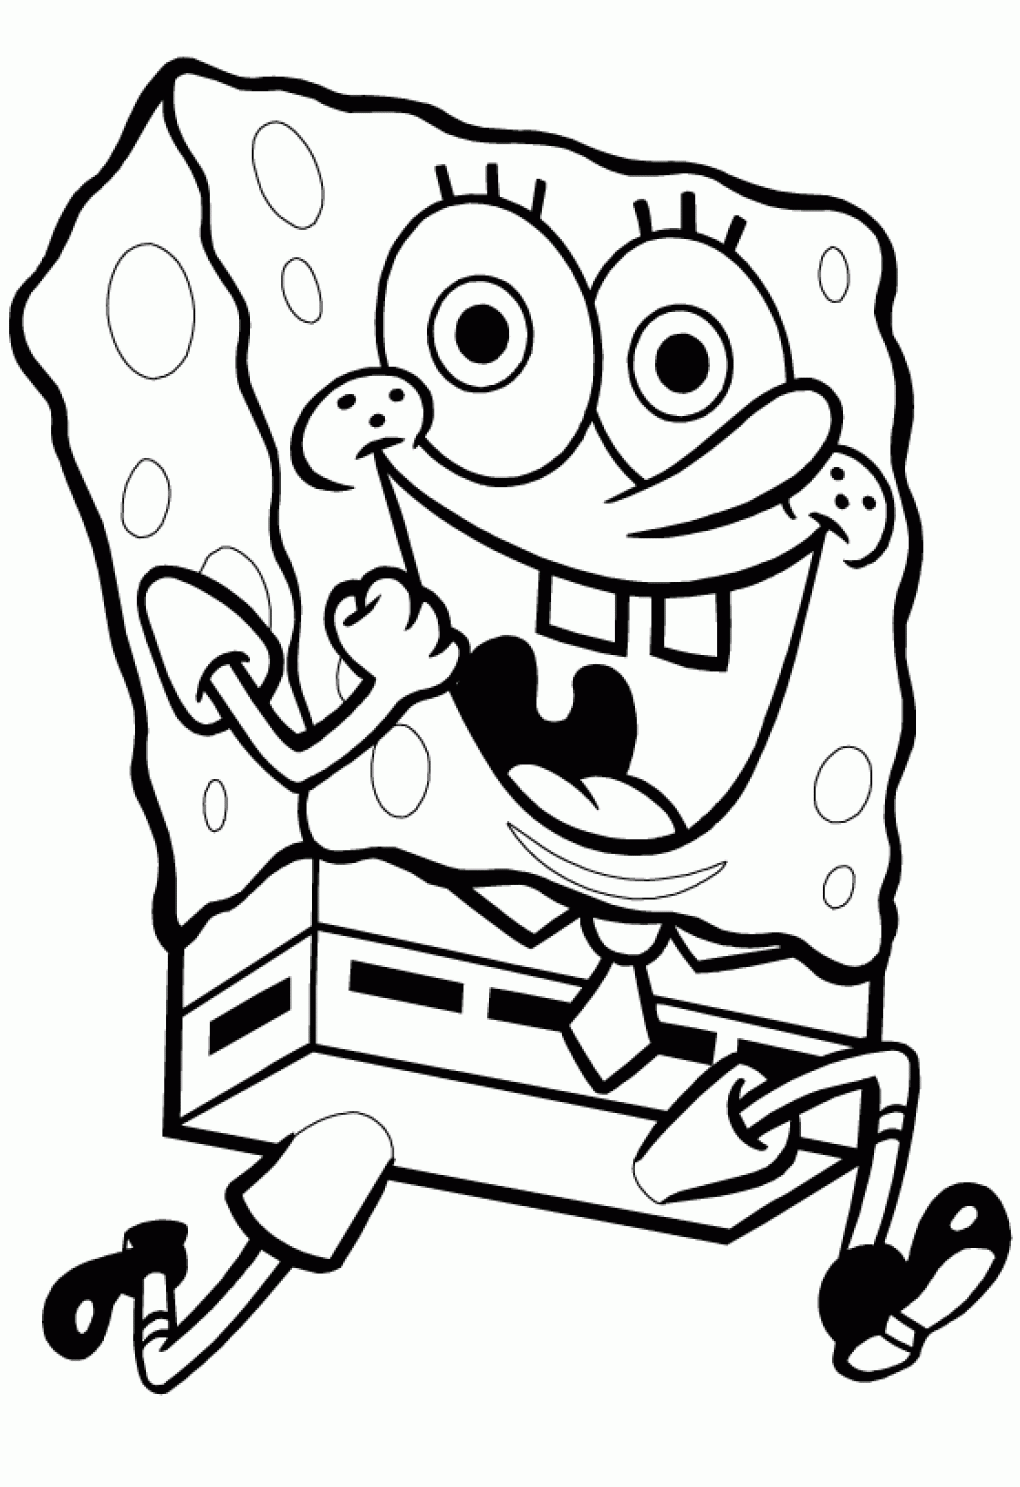 spongebob coloring pages to print - photo #21